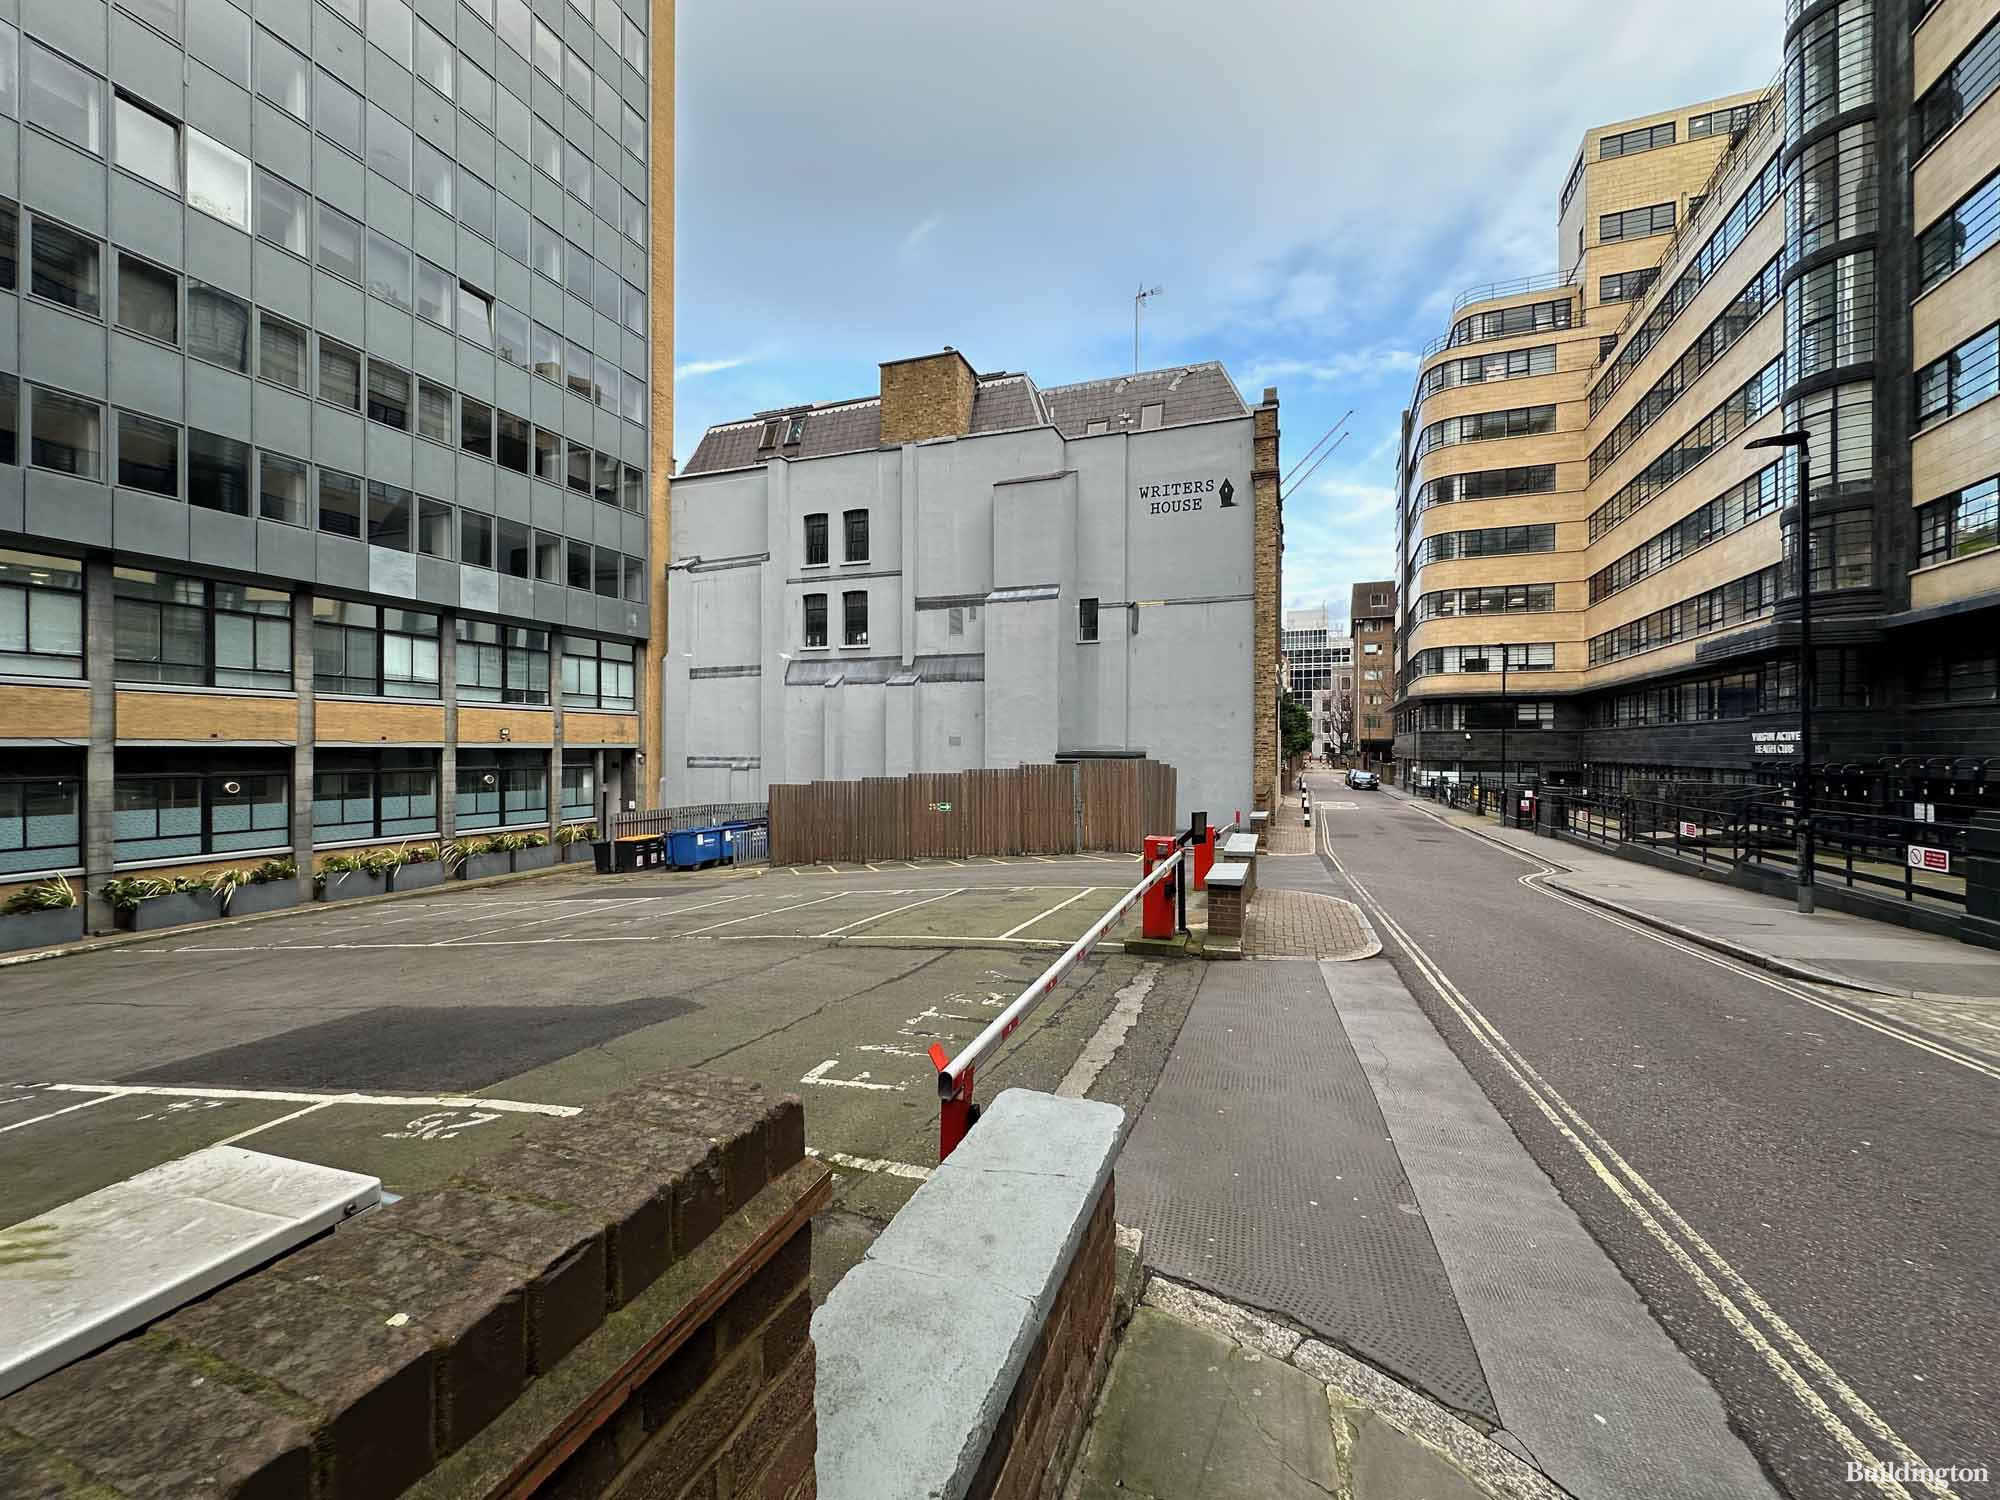 30 Minories development site with St Clare House and Writers House in the City of London EC3.